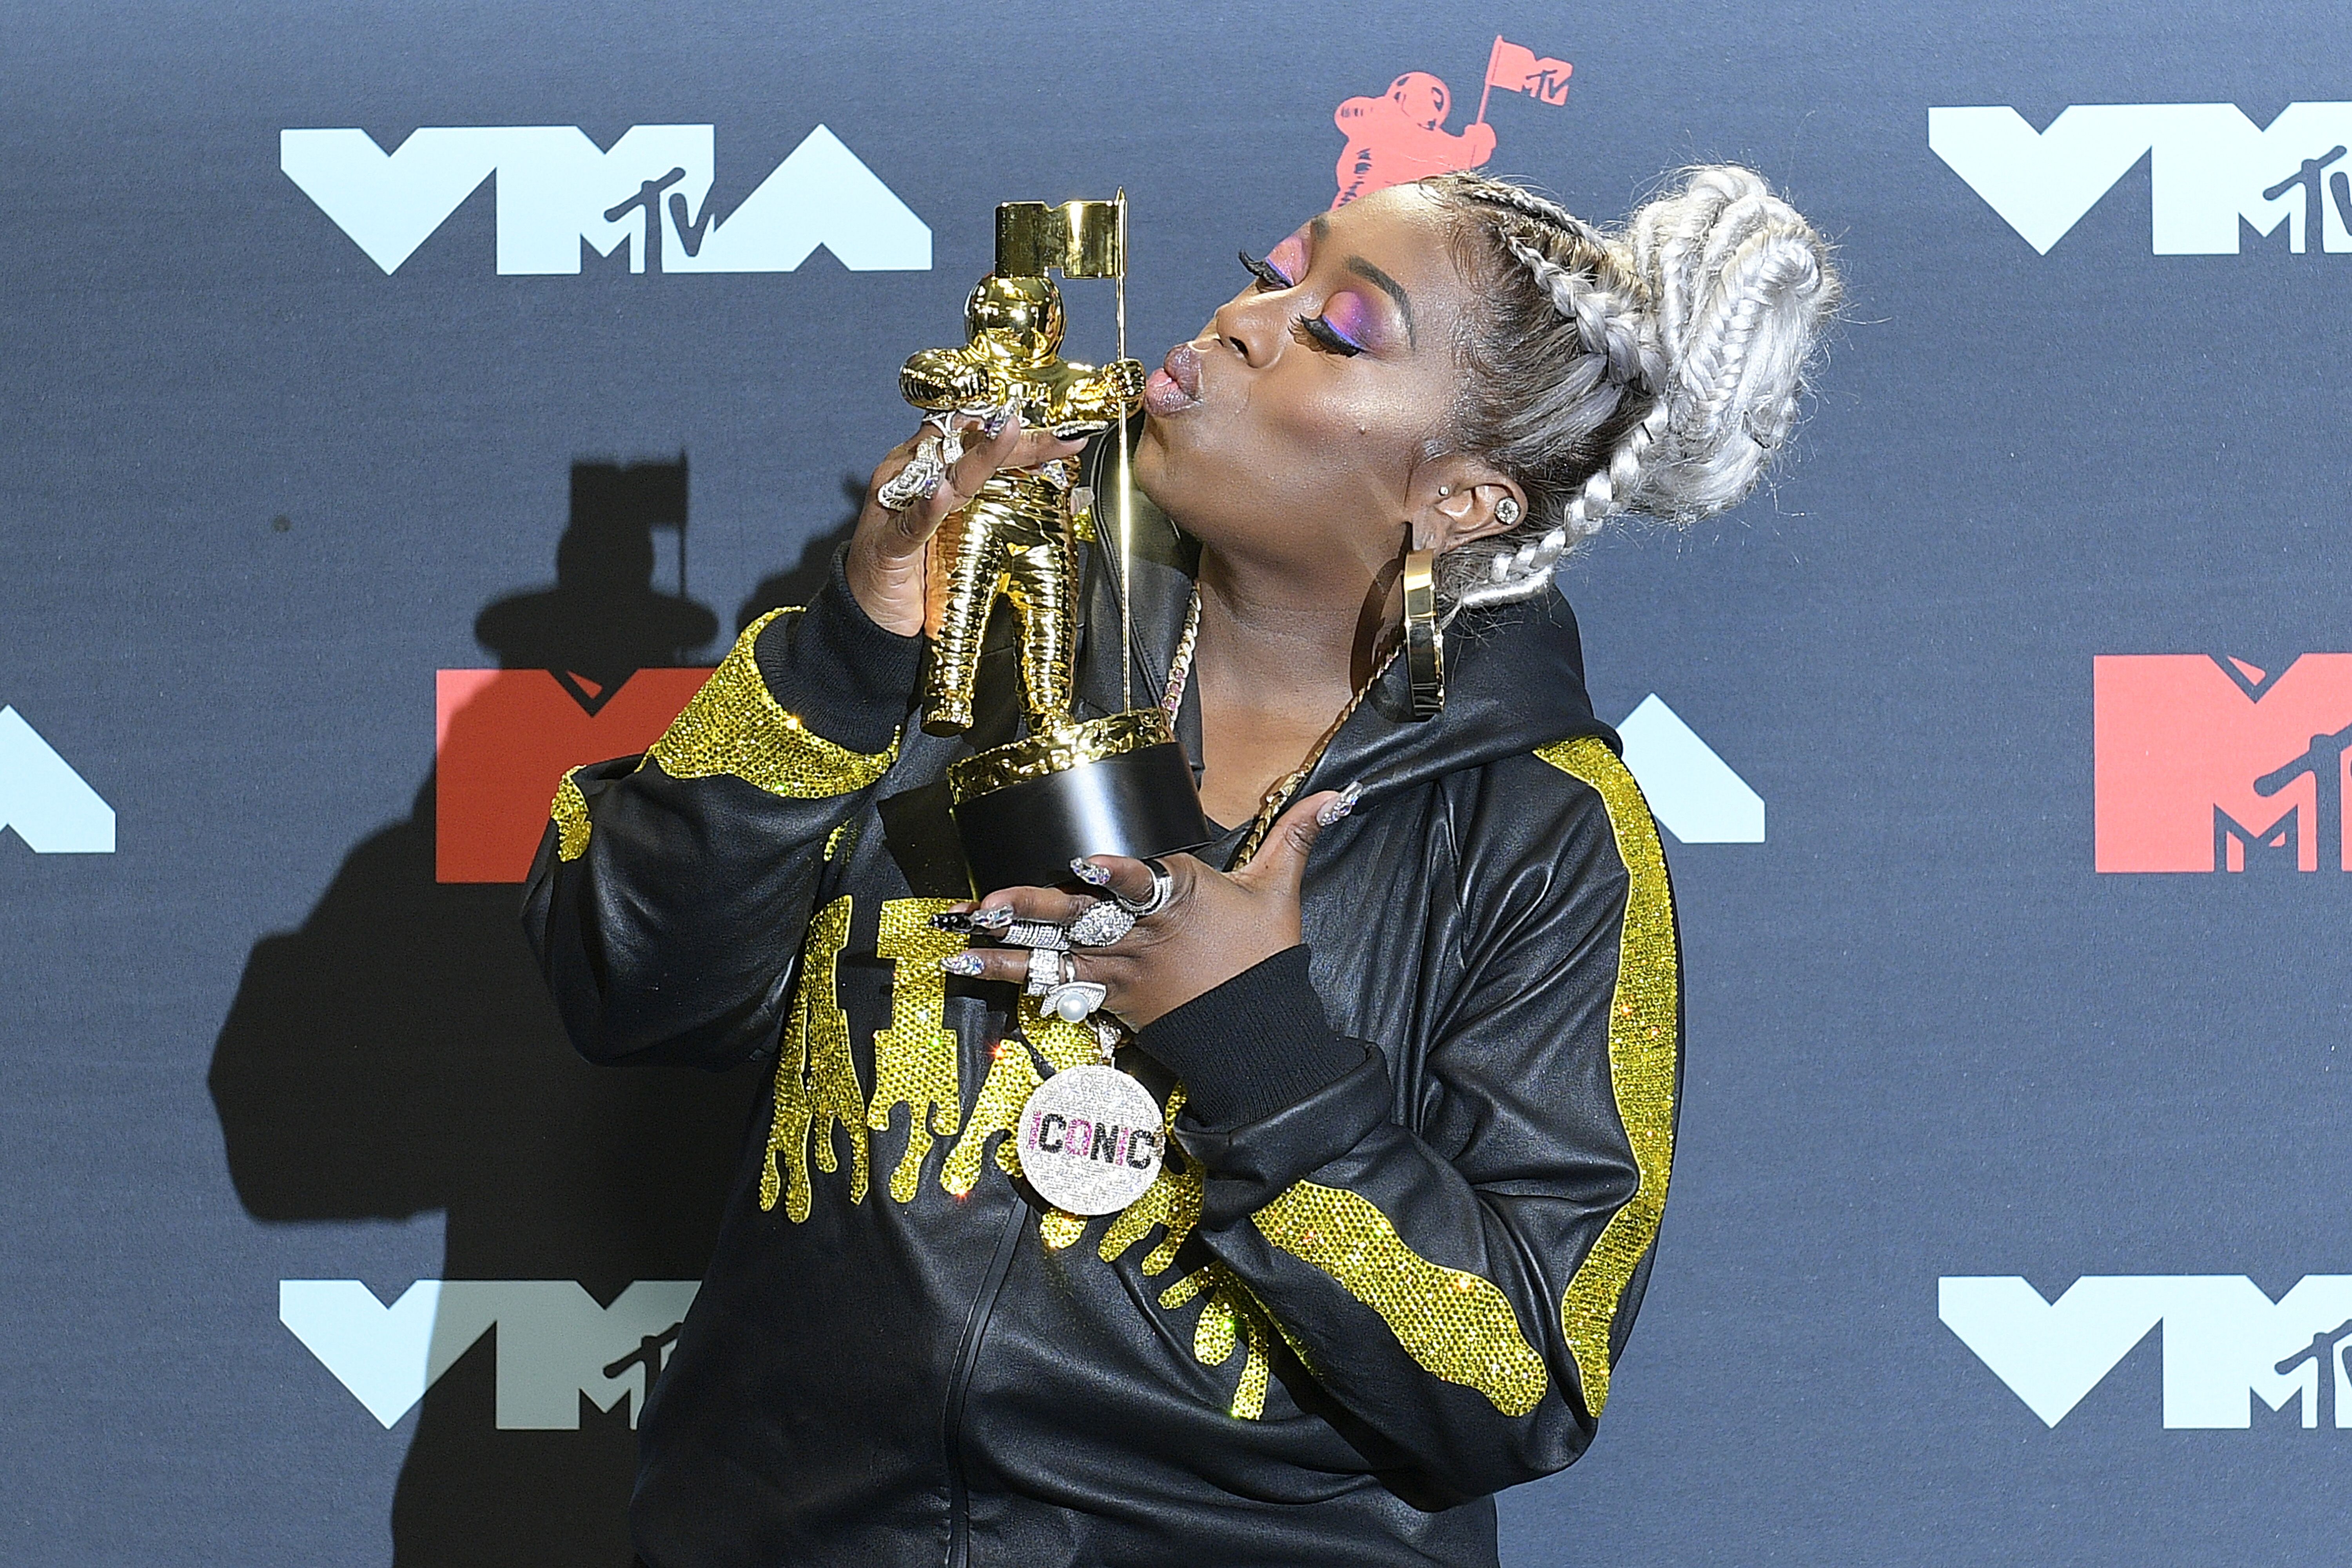 Missy Elliott at the 2019 MTV Video Music Awards in New Jersey/ Source: Getty Images